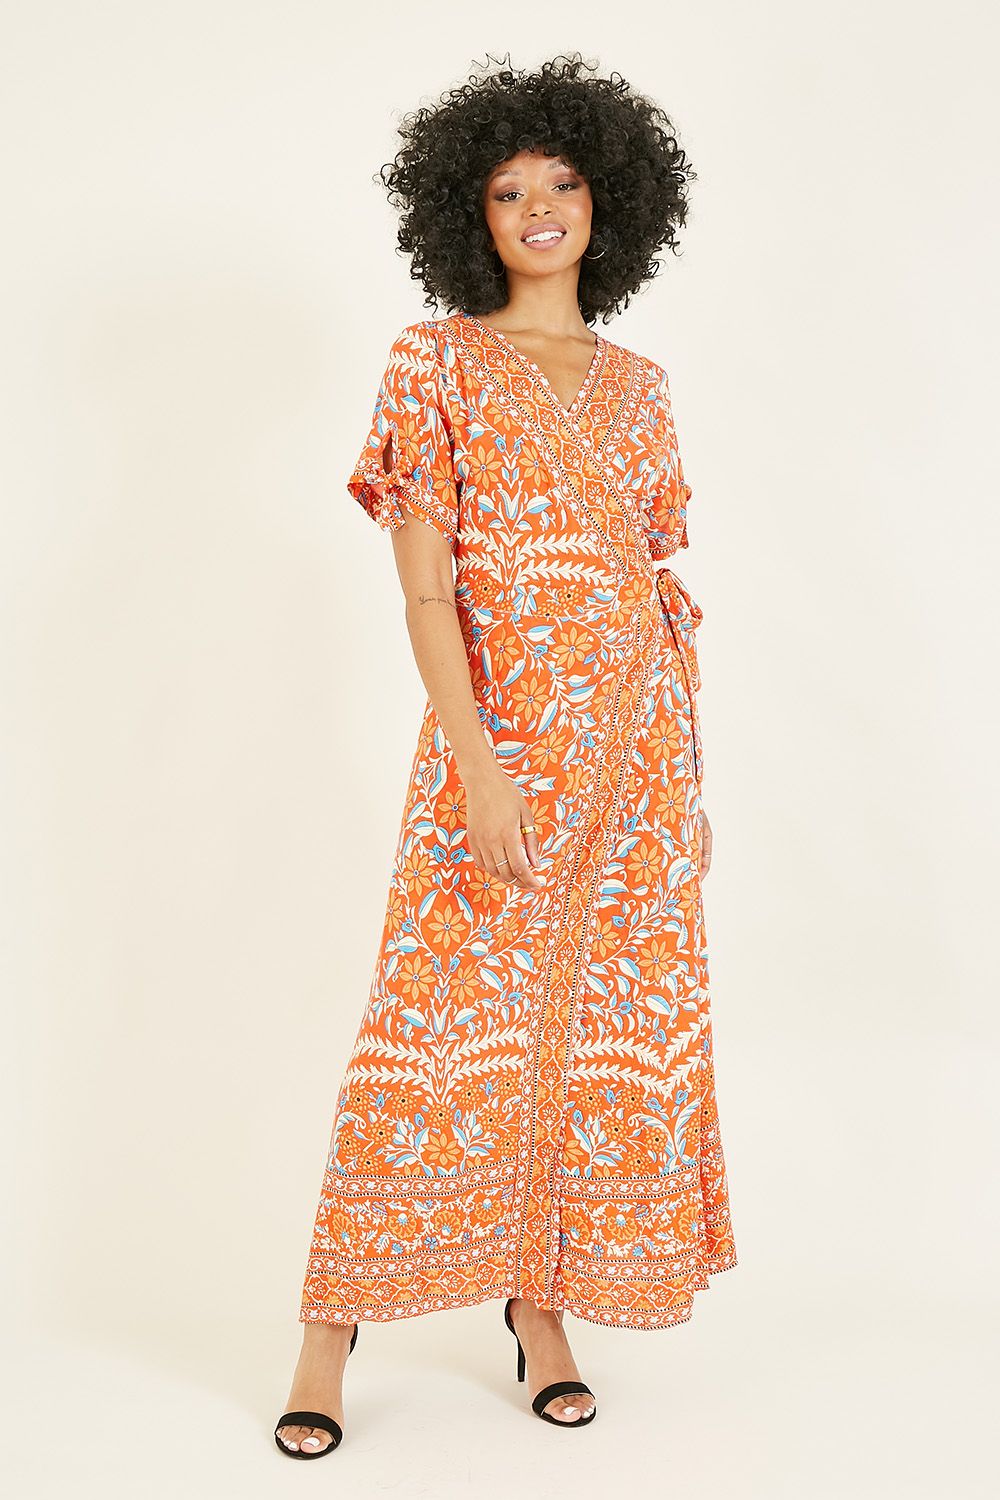 Sunny days call for bright and bold prints and this yumi orange floral printed dress certainly delivers. With a wrap style v neck, this dress pulls you in at the waist and features button up sleeves.  crafted with the sun in mind, stay cool is this lightweight, breathable fit.